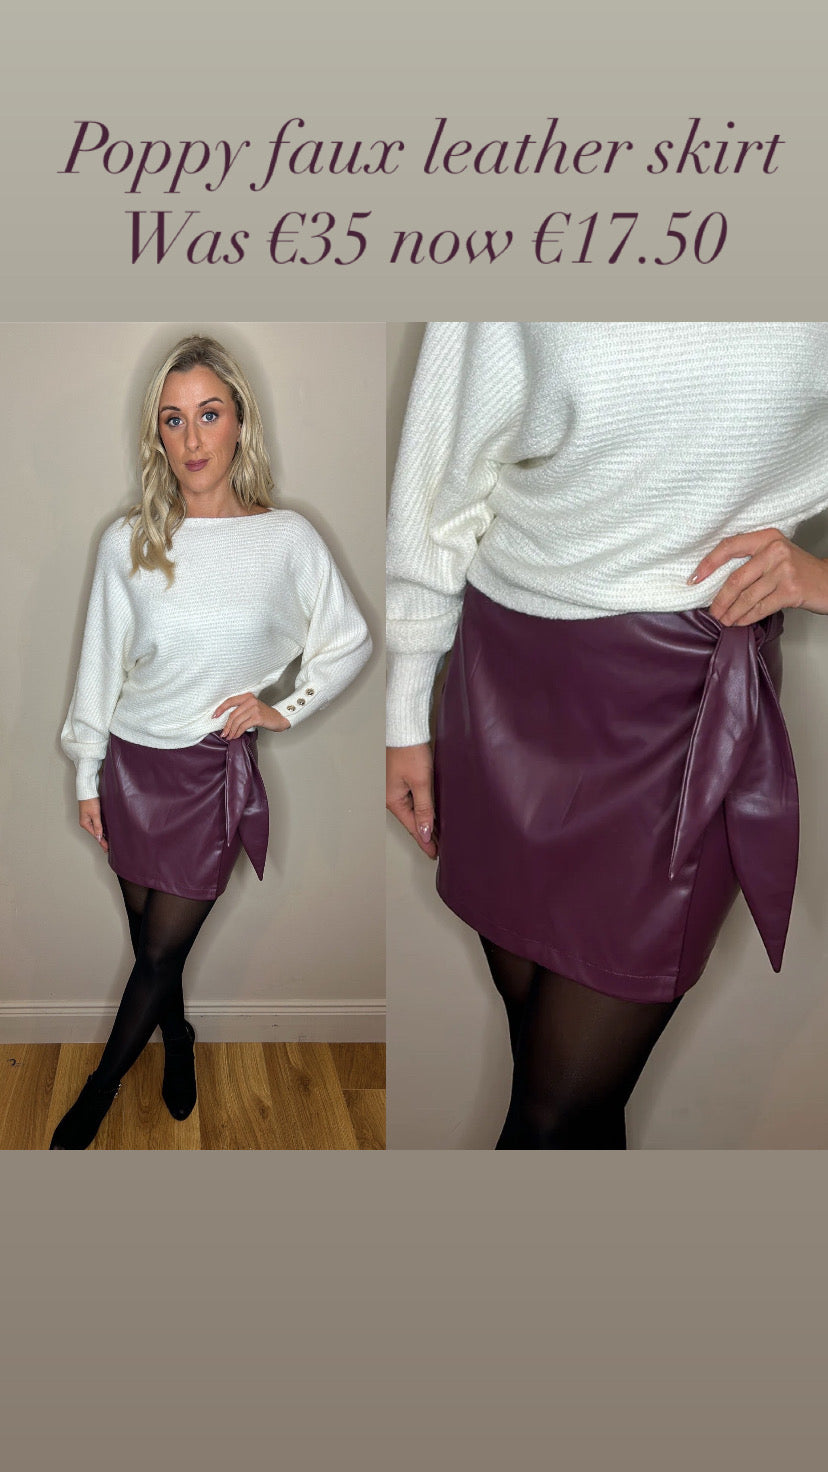 Poppy faux leather skirt